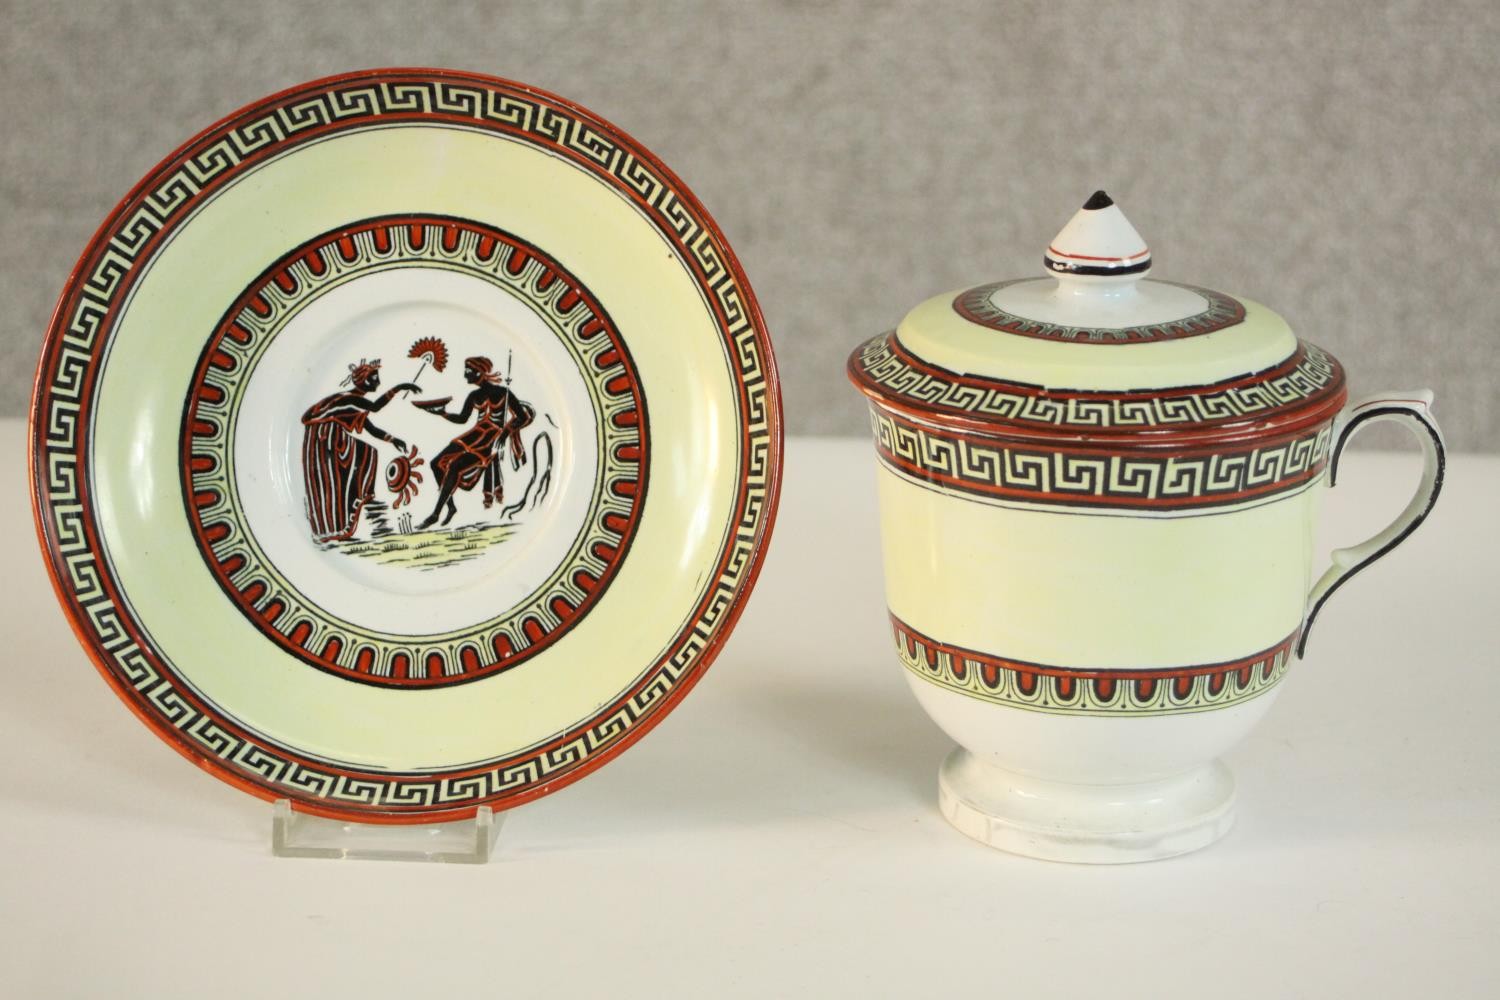 A Classical Greek key and figural design lidded hot chocolate cup and saucer, makers mark and